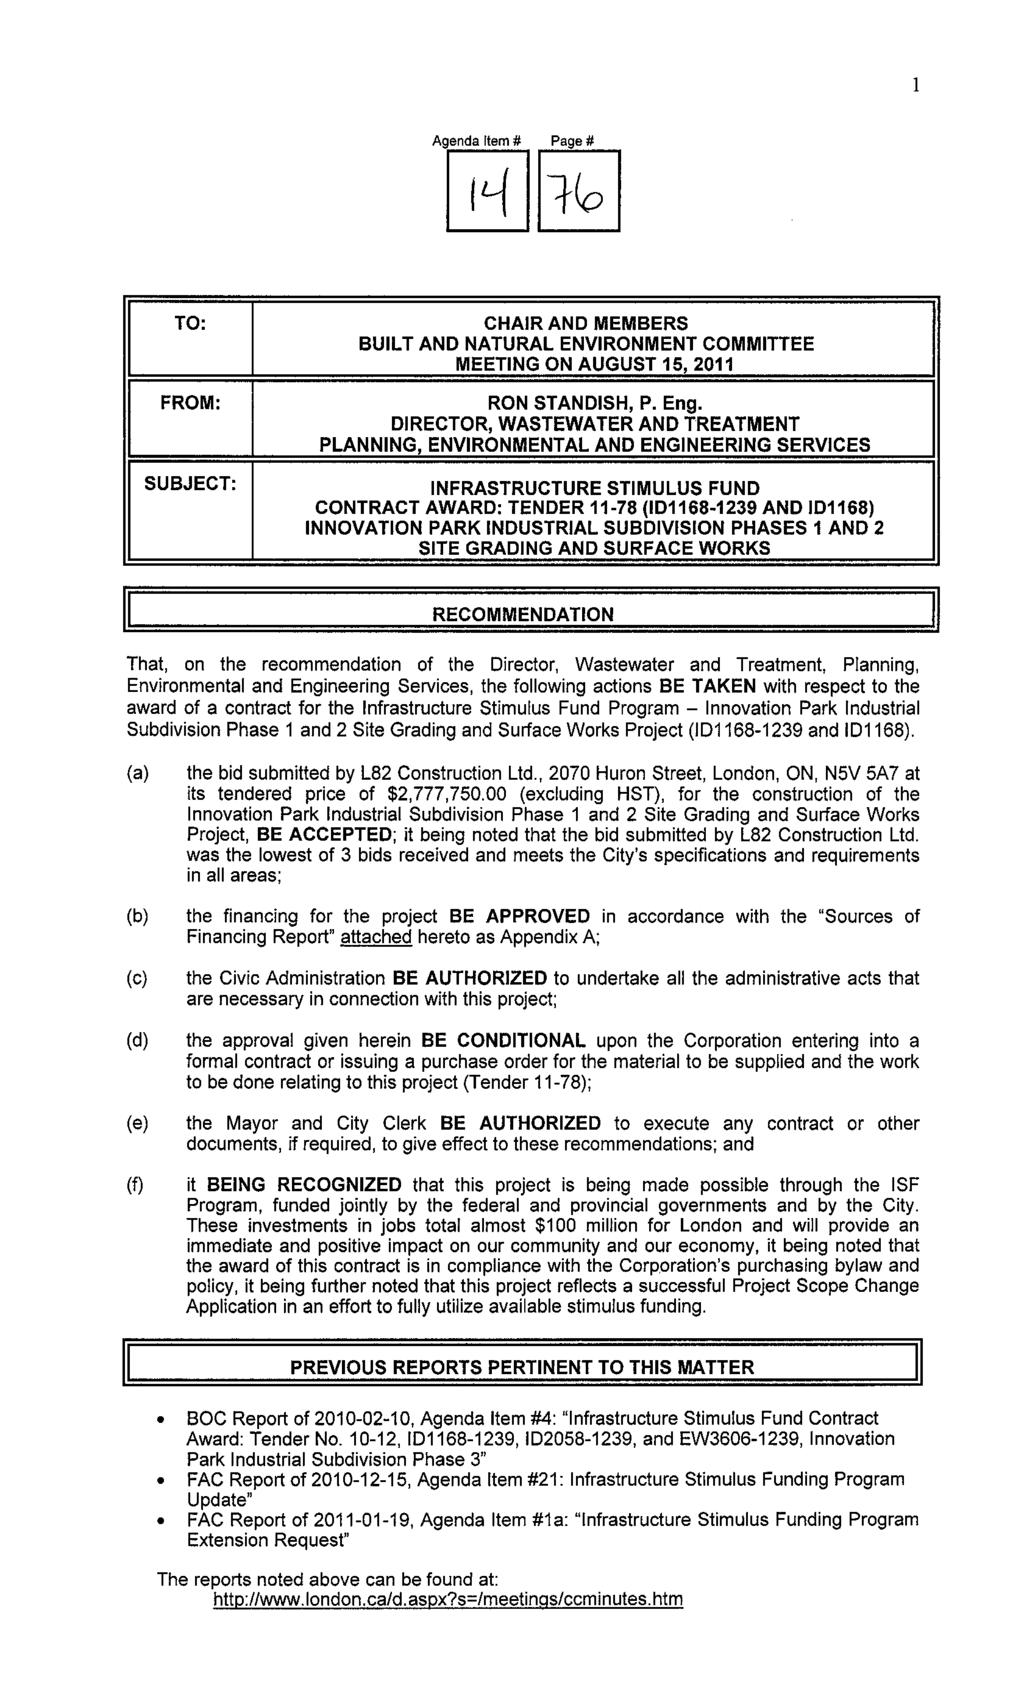 1 Agenda pqq Item # Page # TO: 11 FROM: I! SUBJECT: I CHAIR AND MEMBERS BUILT AND NATURAL ENVIRONMENT COMMITTEE MEETING ON AUGUST 15,2011 RON STANDISH, P. Eng. DIRECTOR. -.._-.-.., WASTEWATER...-.--.